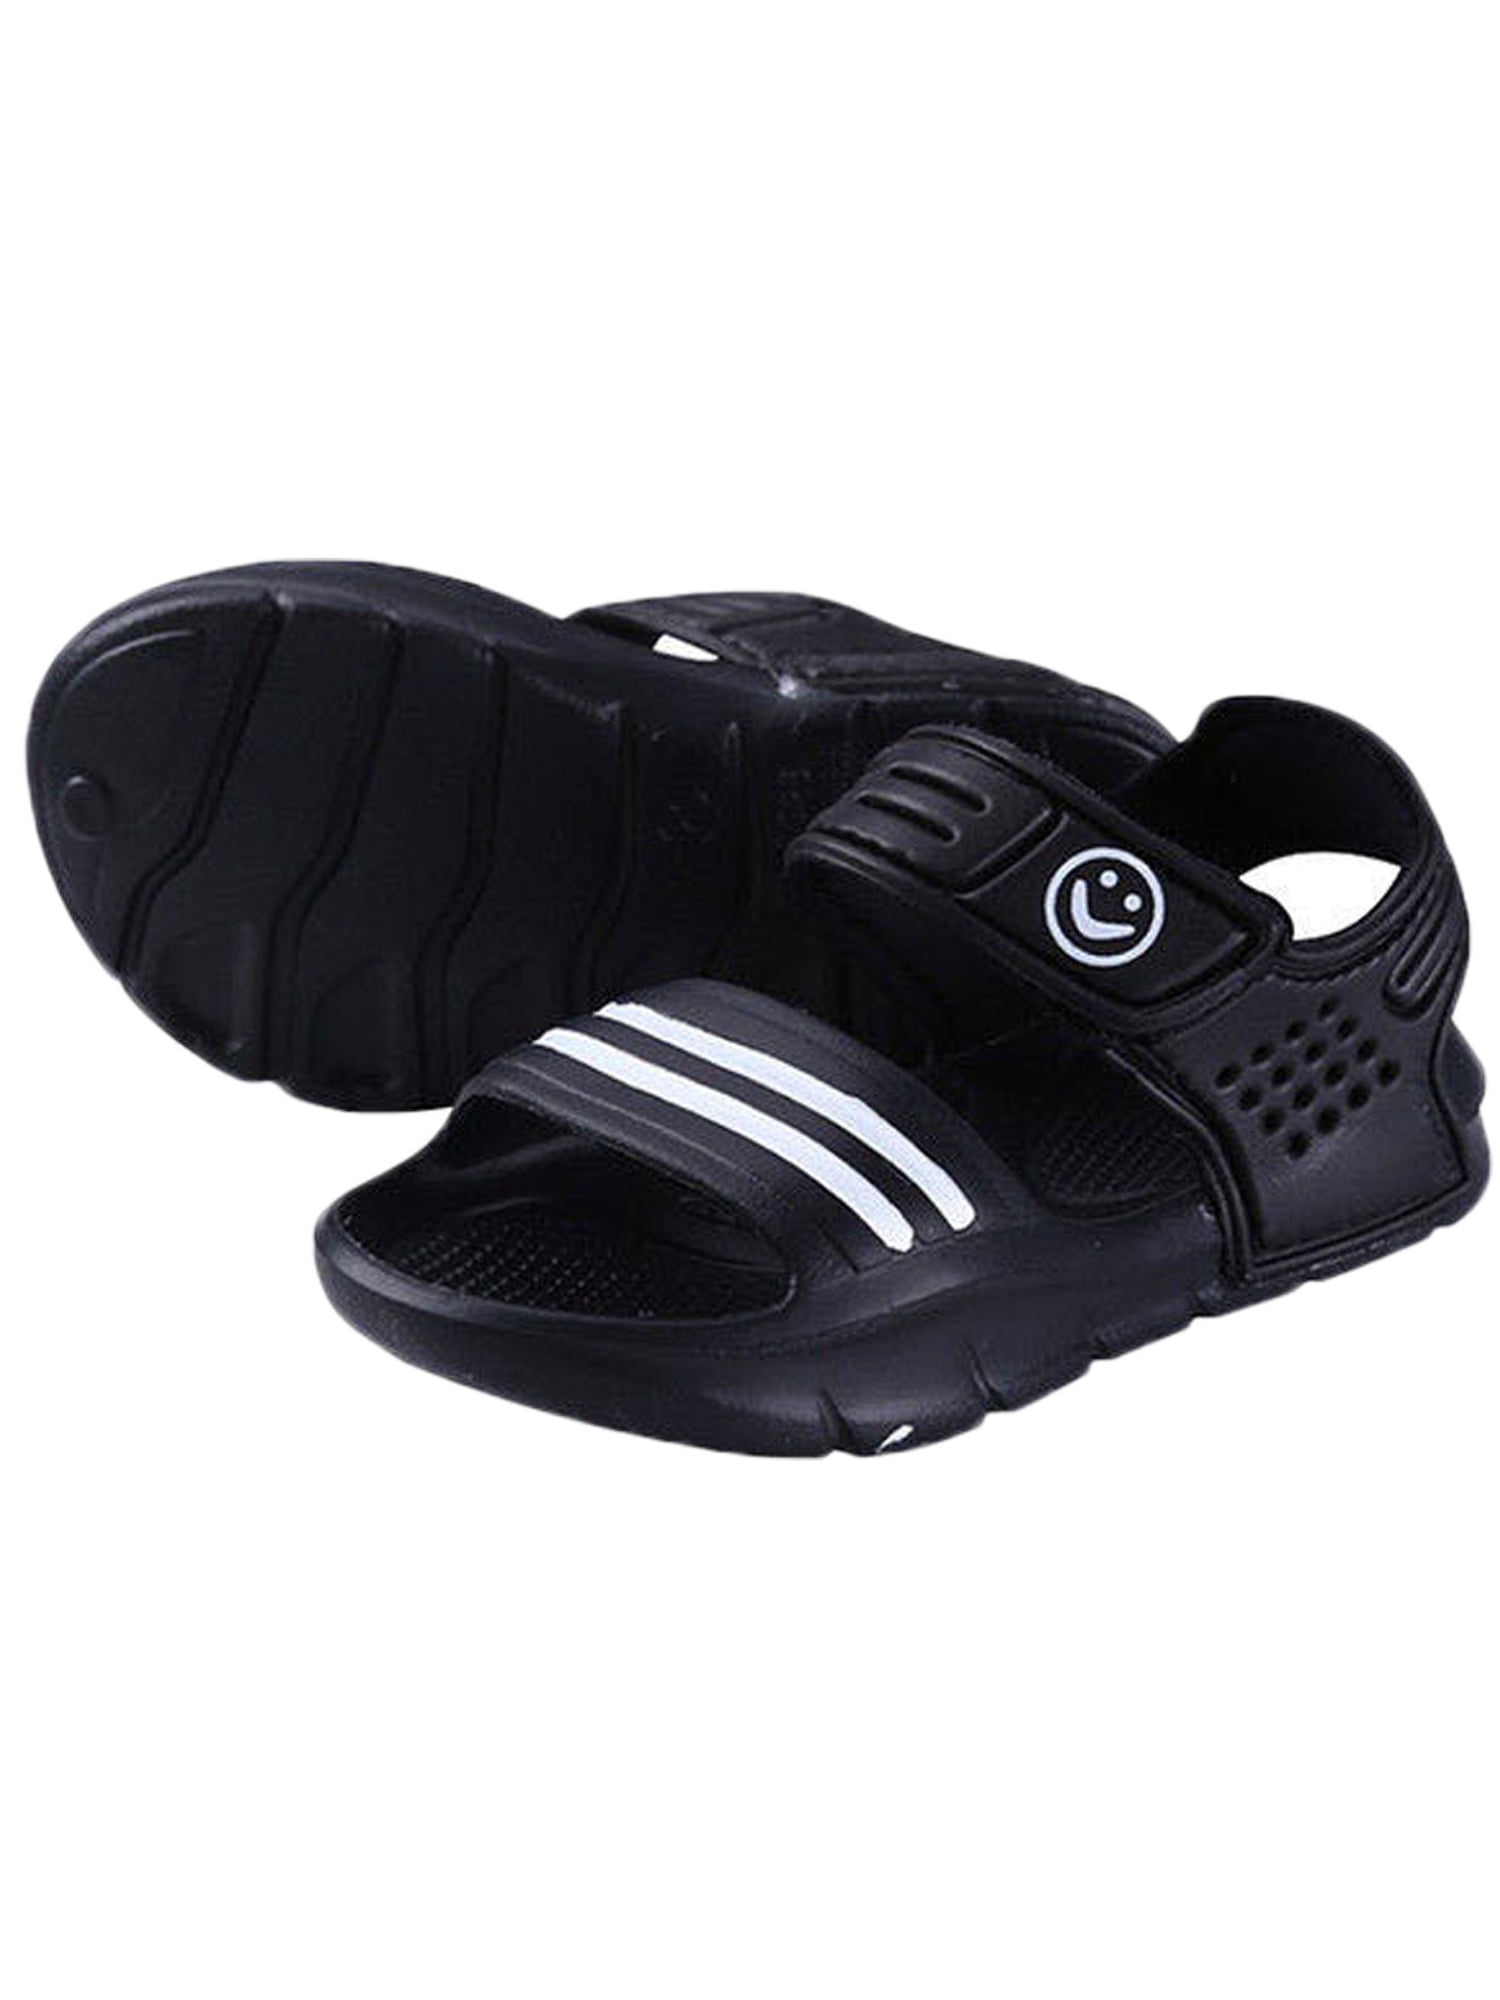 baby surf shoes